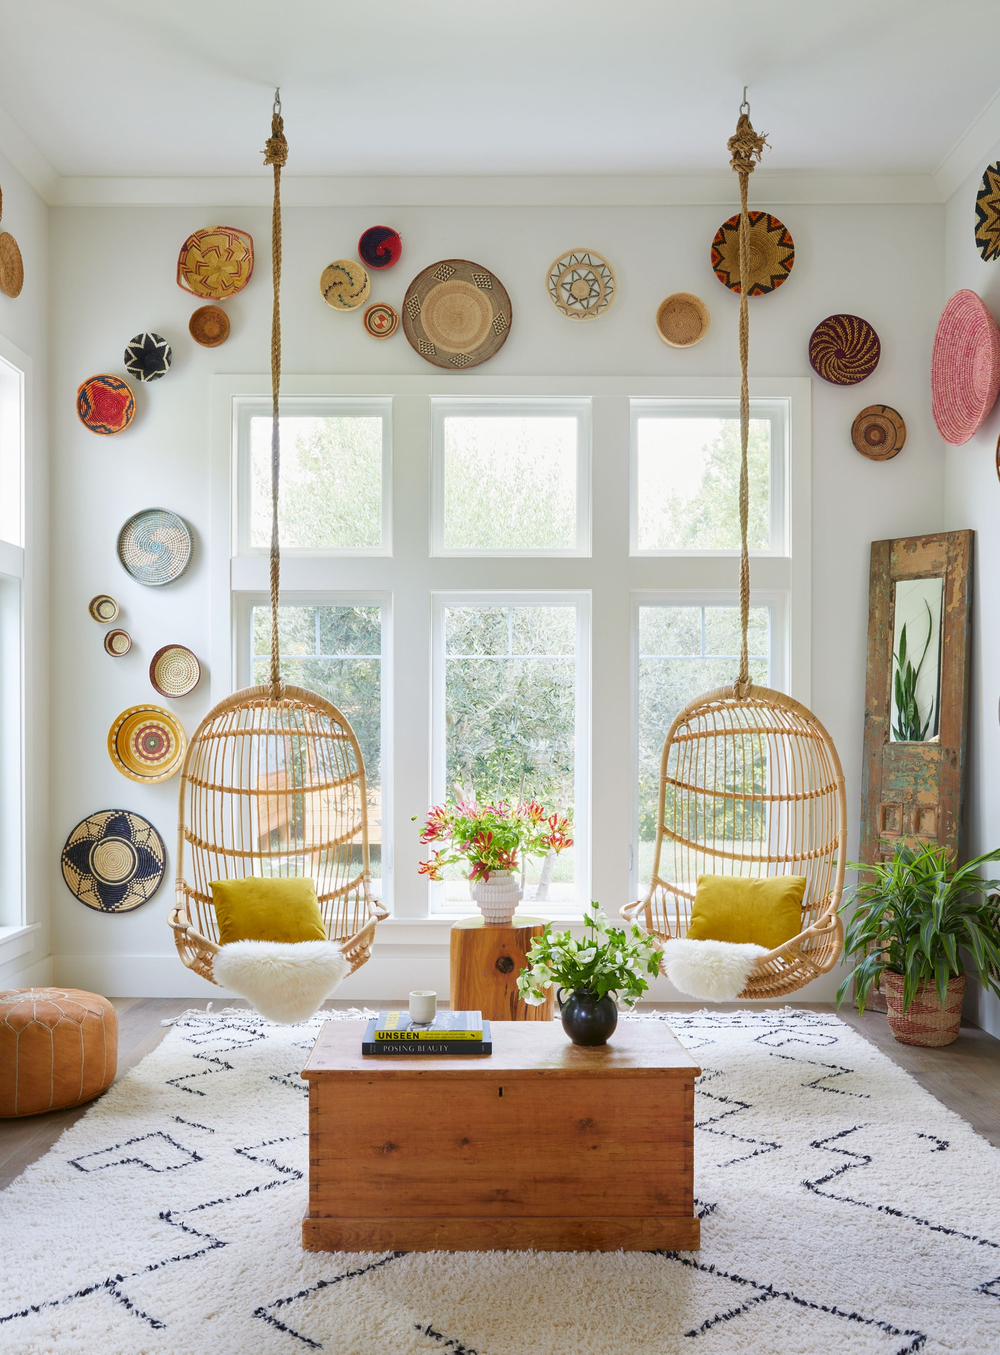 Fun and eclectic yet uncluttered